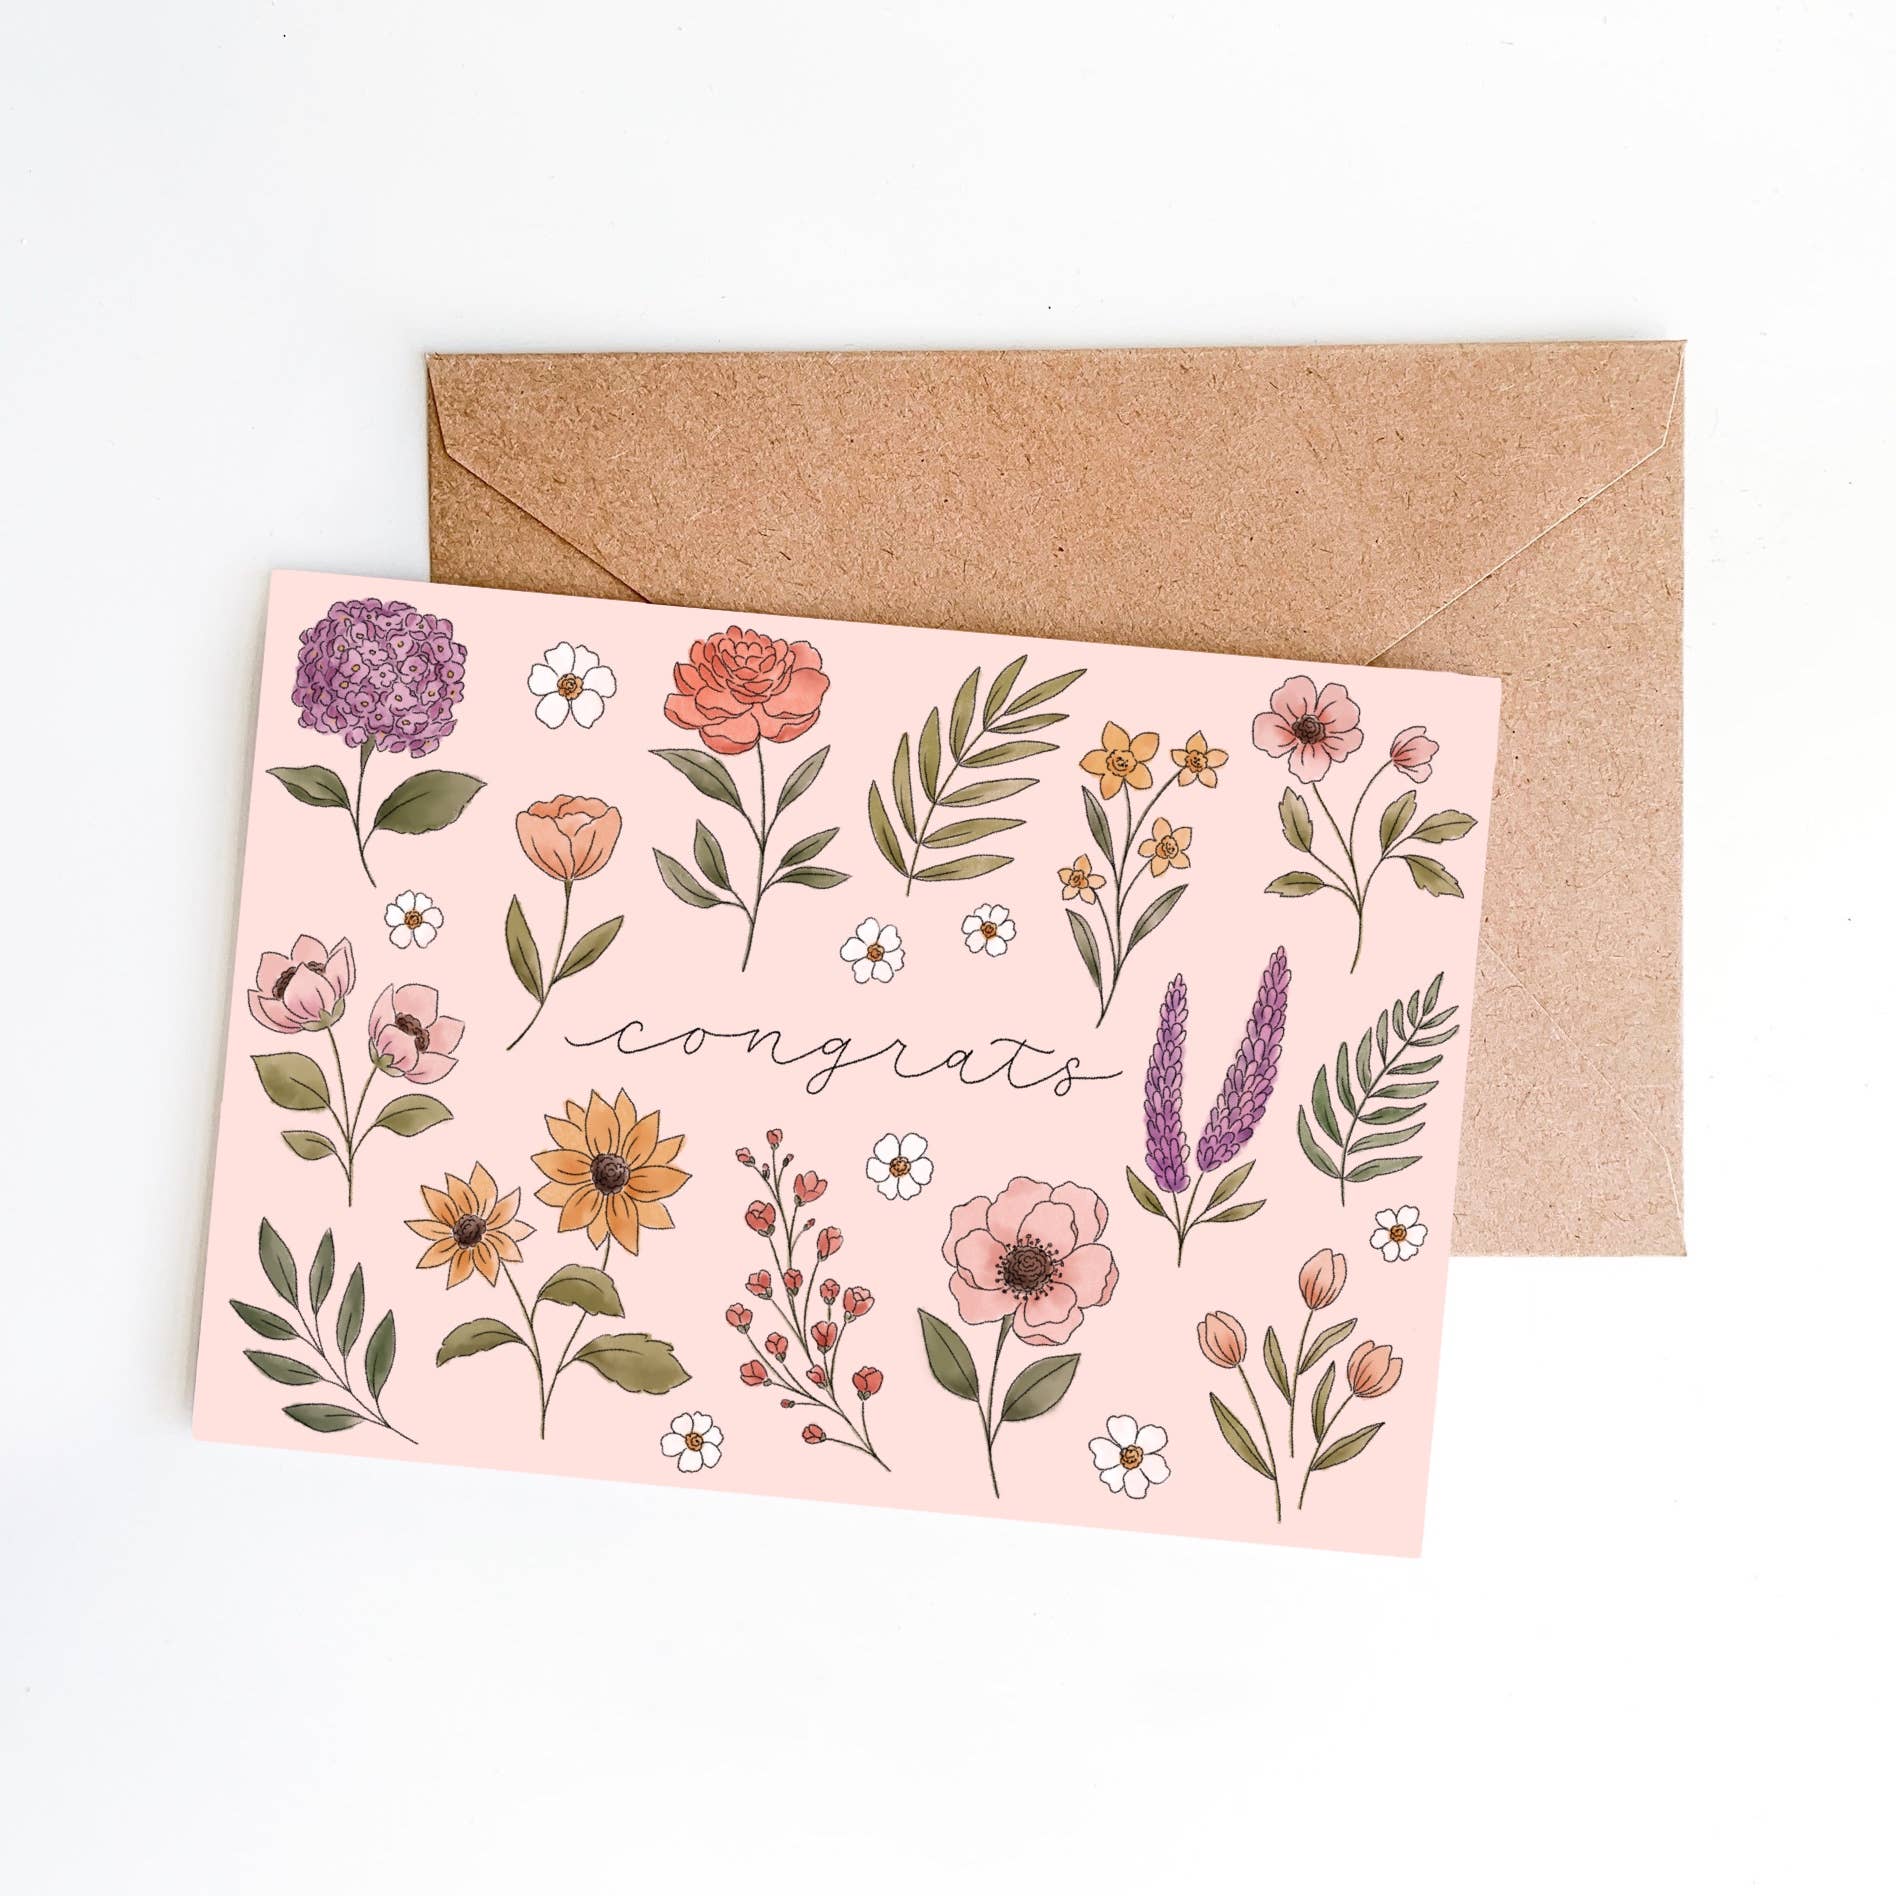 Wildflower Congrats Greeting Card